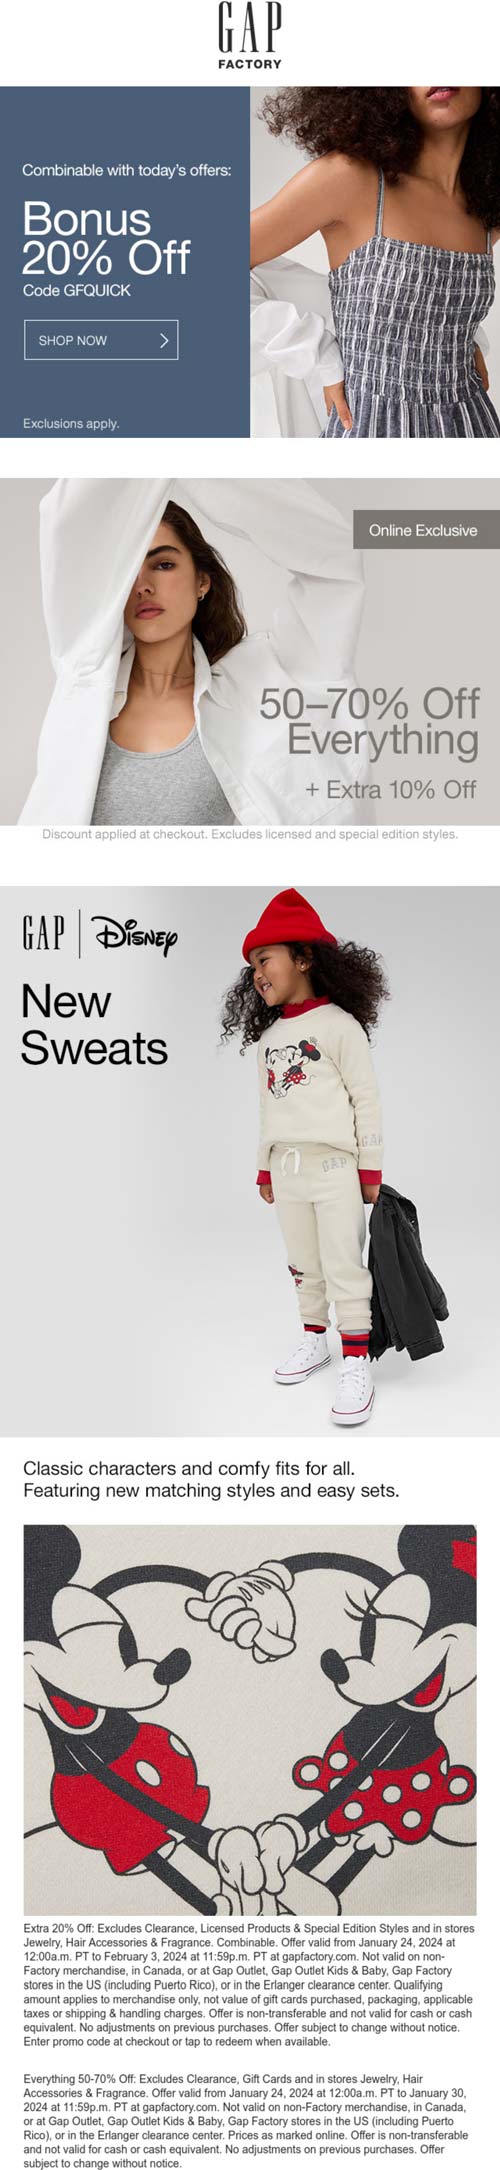 60-80% off everything & more online at Gap Factory via promo code GFQUICK #gapfactory